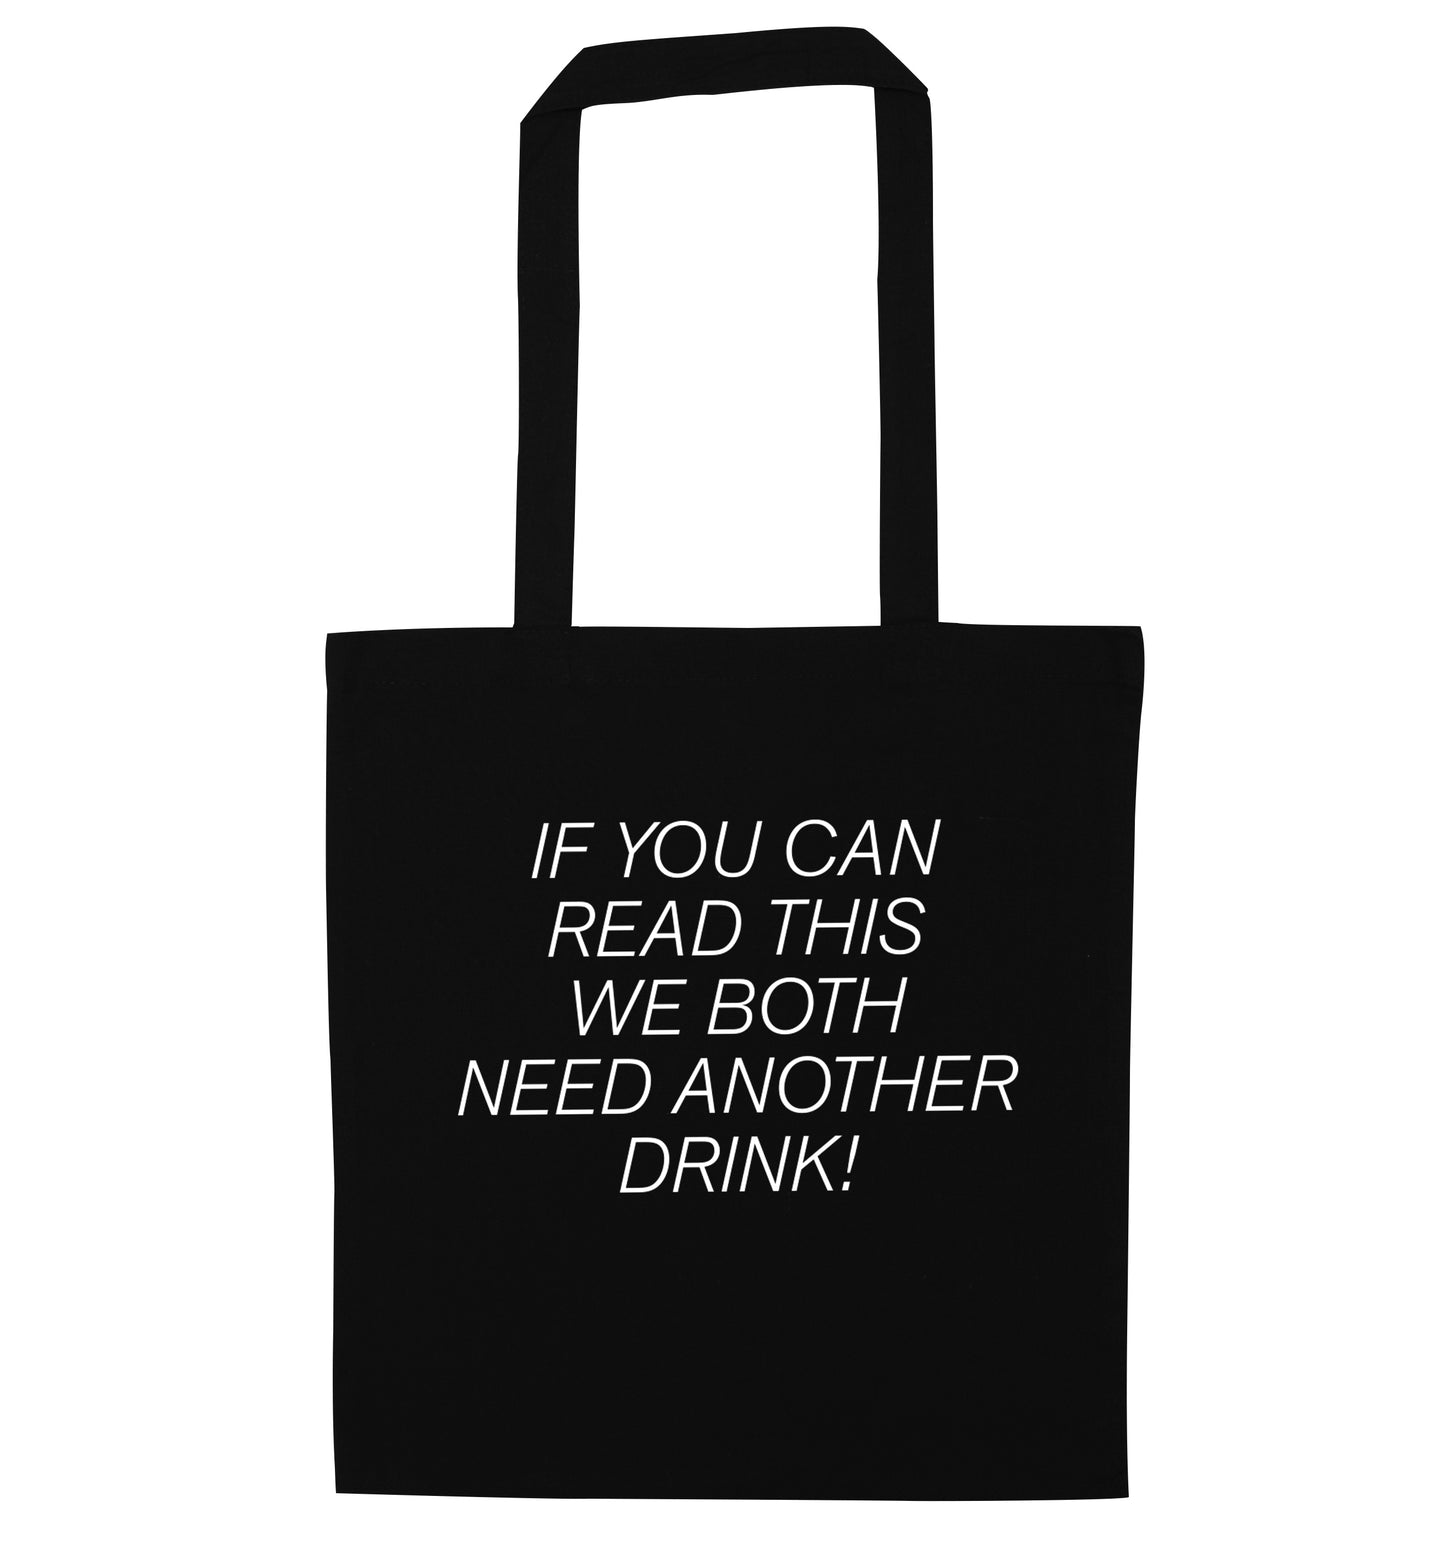 If you can read this we both need another drink! black tote bag